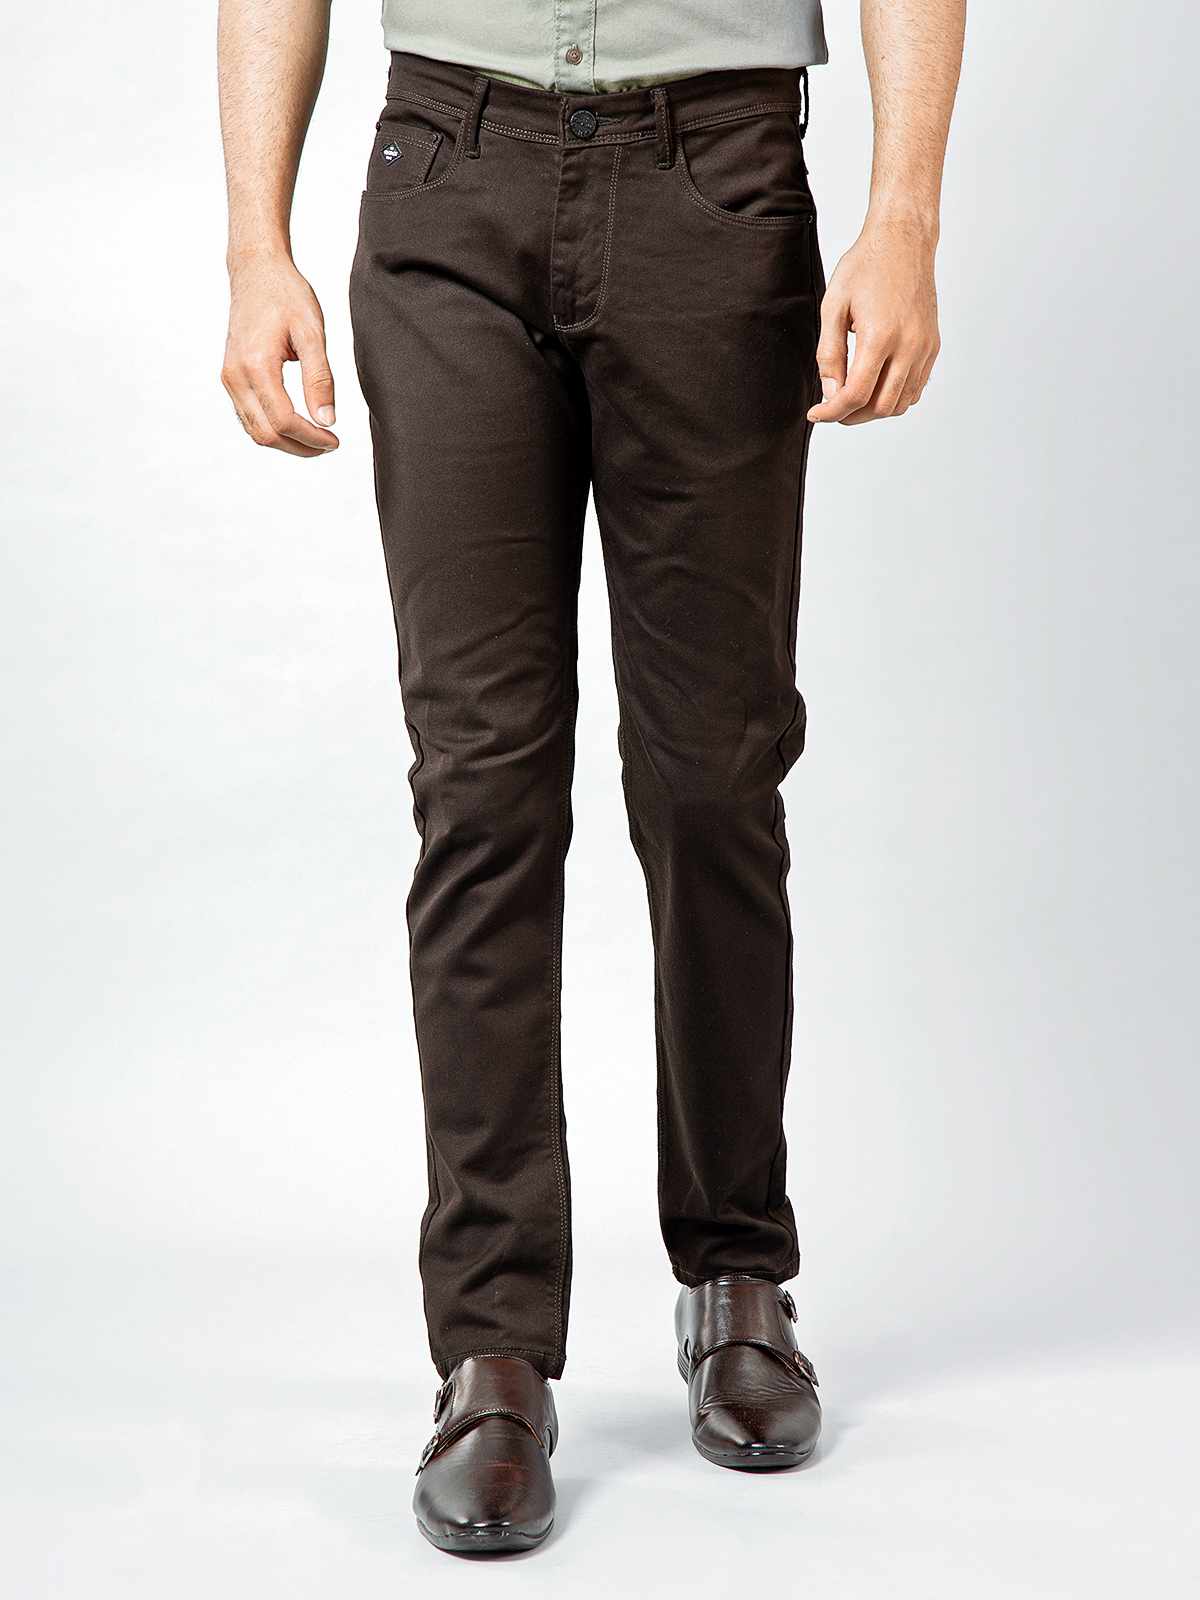 gs78 dark brown cotton solid trouser 1642998146as2116595